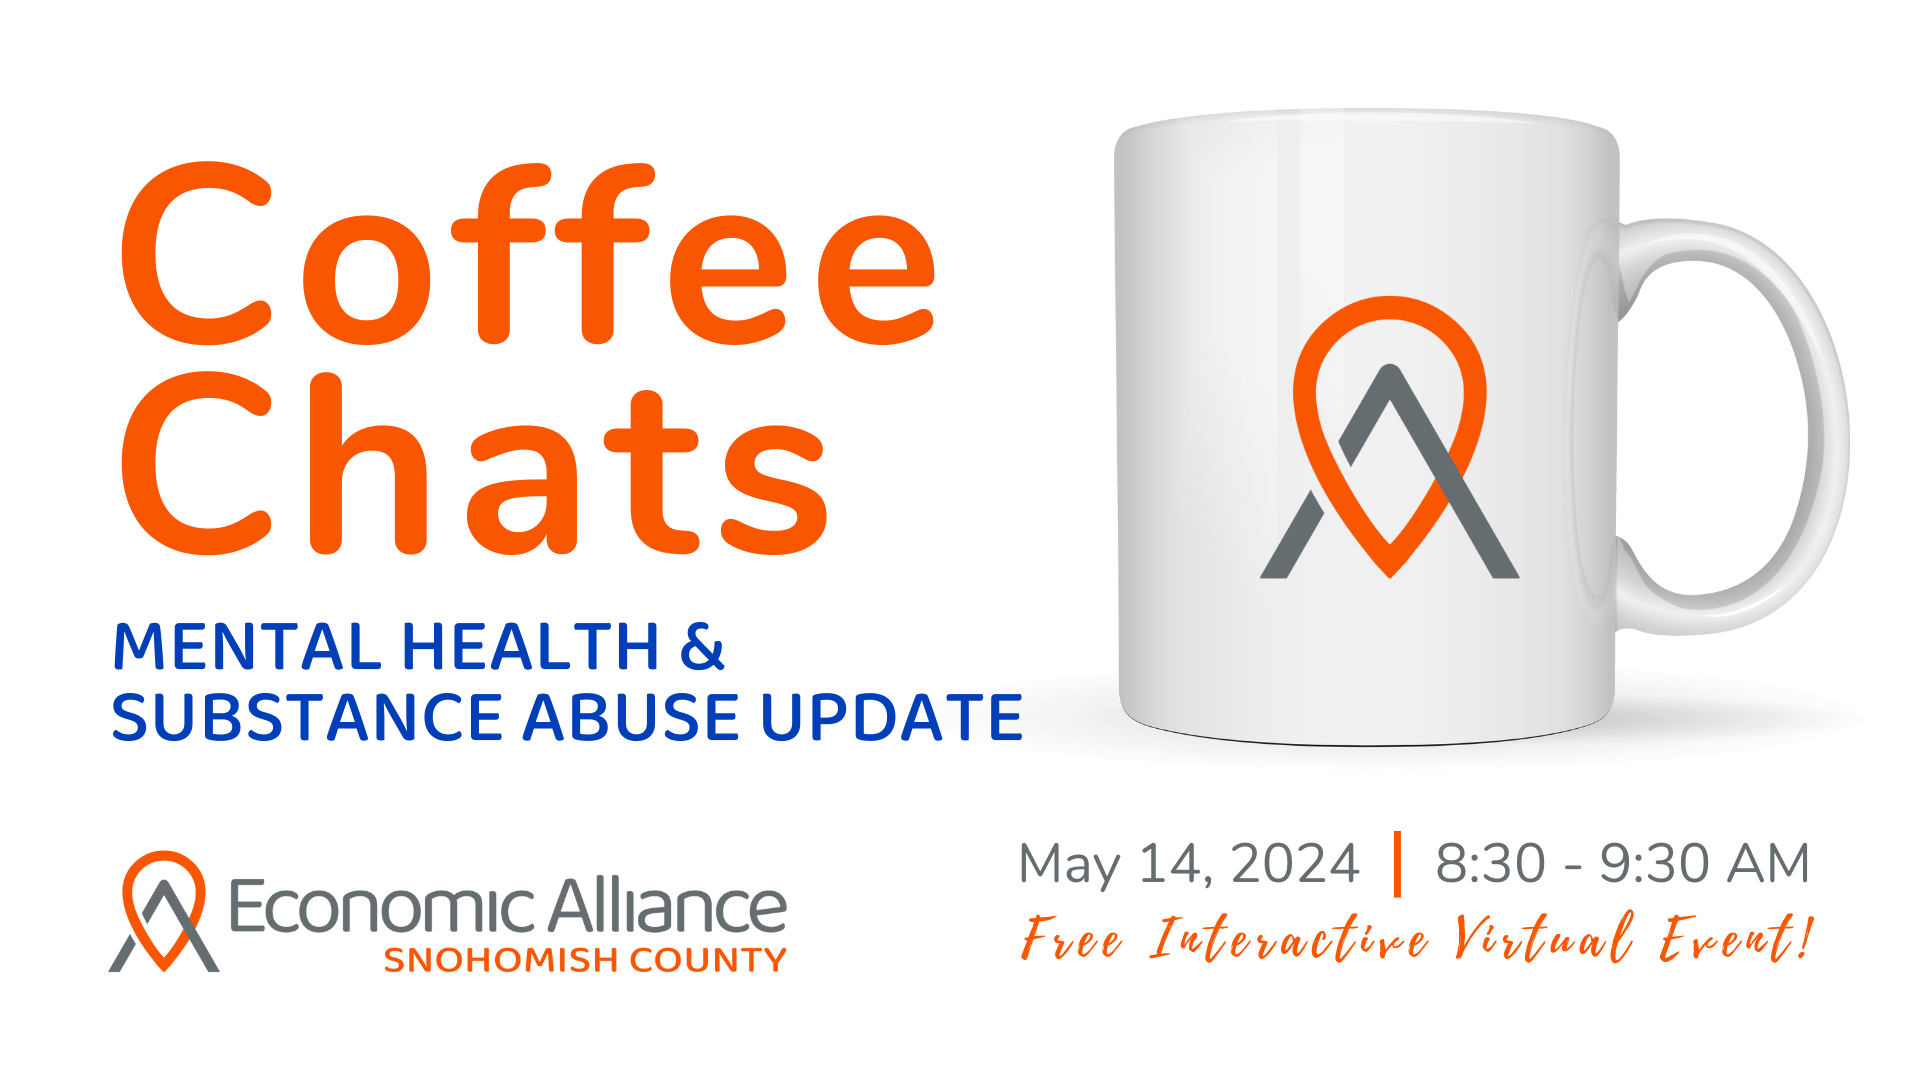 Event Promo Photo For Coffee Chats: Mental Health & Substance Abuse Update